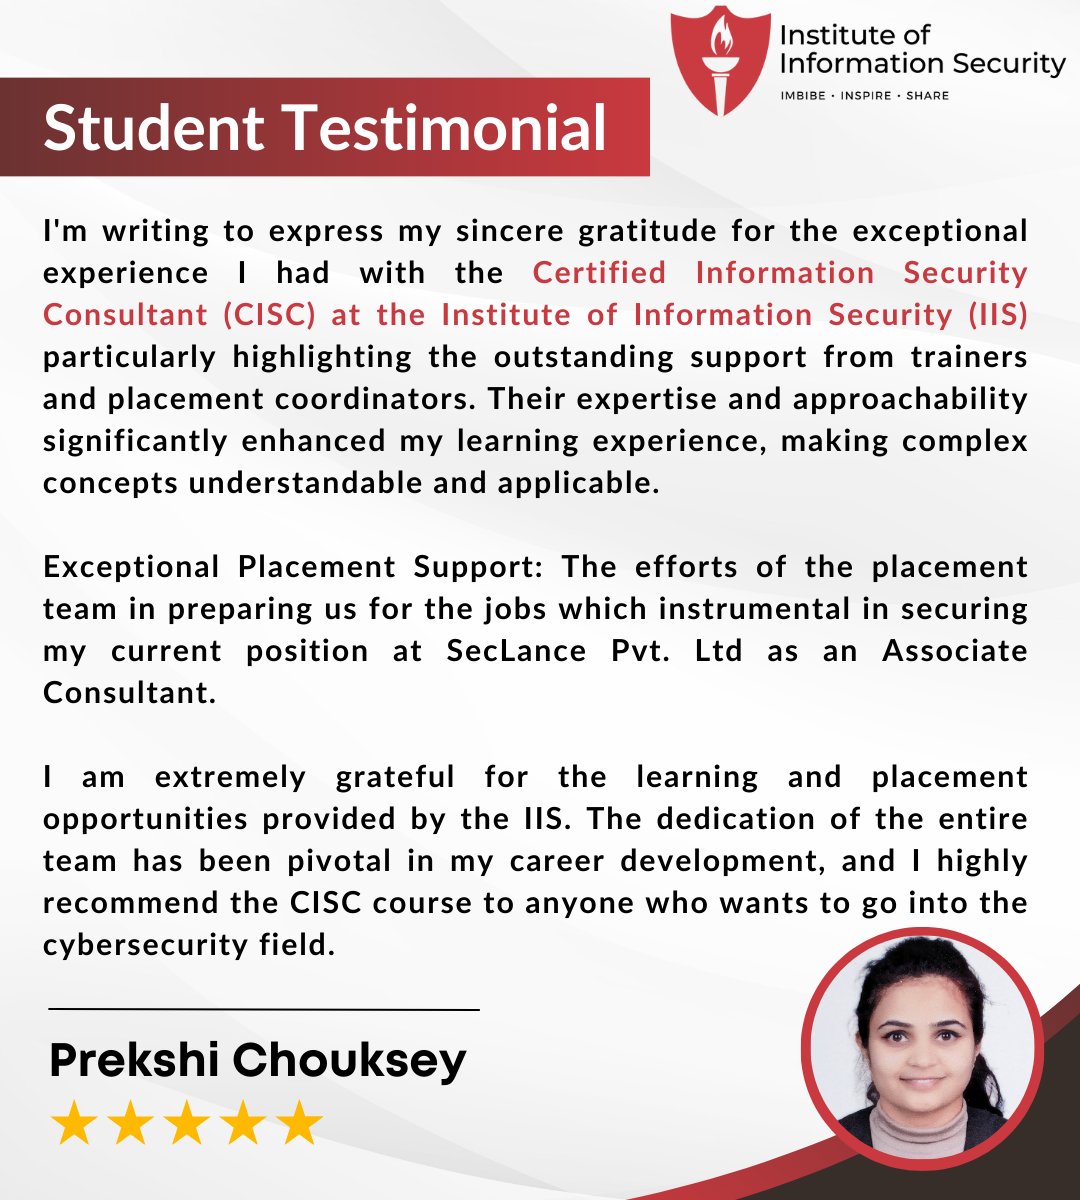 Congratulations, Prekshi Chouksey, on successfully completing our Certified Information Security Consultant (CISC) training program and securing a position as a Associate Consultant at SecLance Pvt. Ltd.

#cybersecurityexpert #infosecurity #cybersecurityawareness 

[1/3]